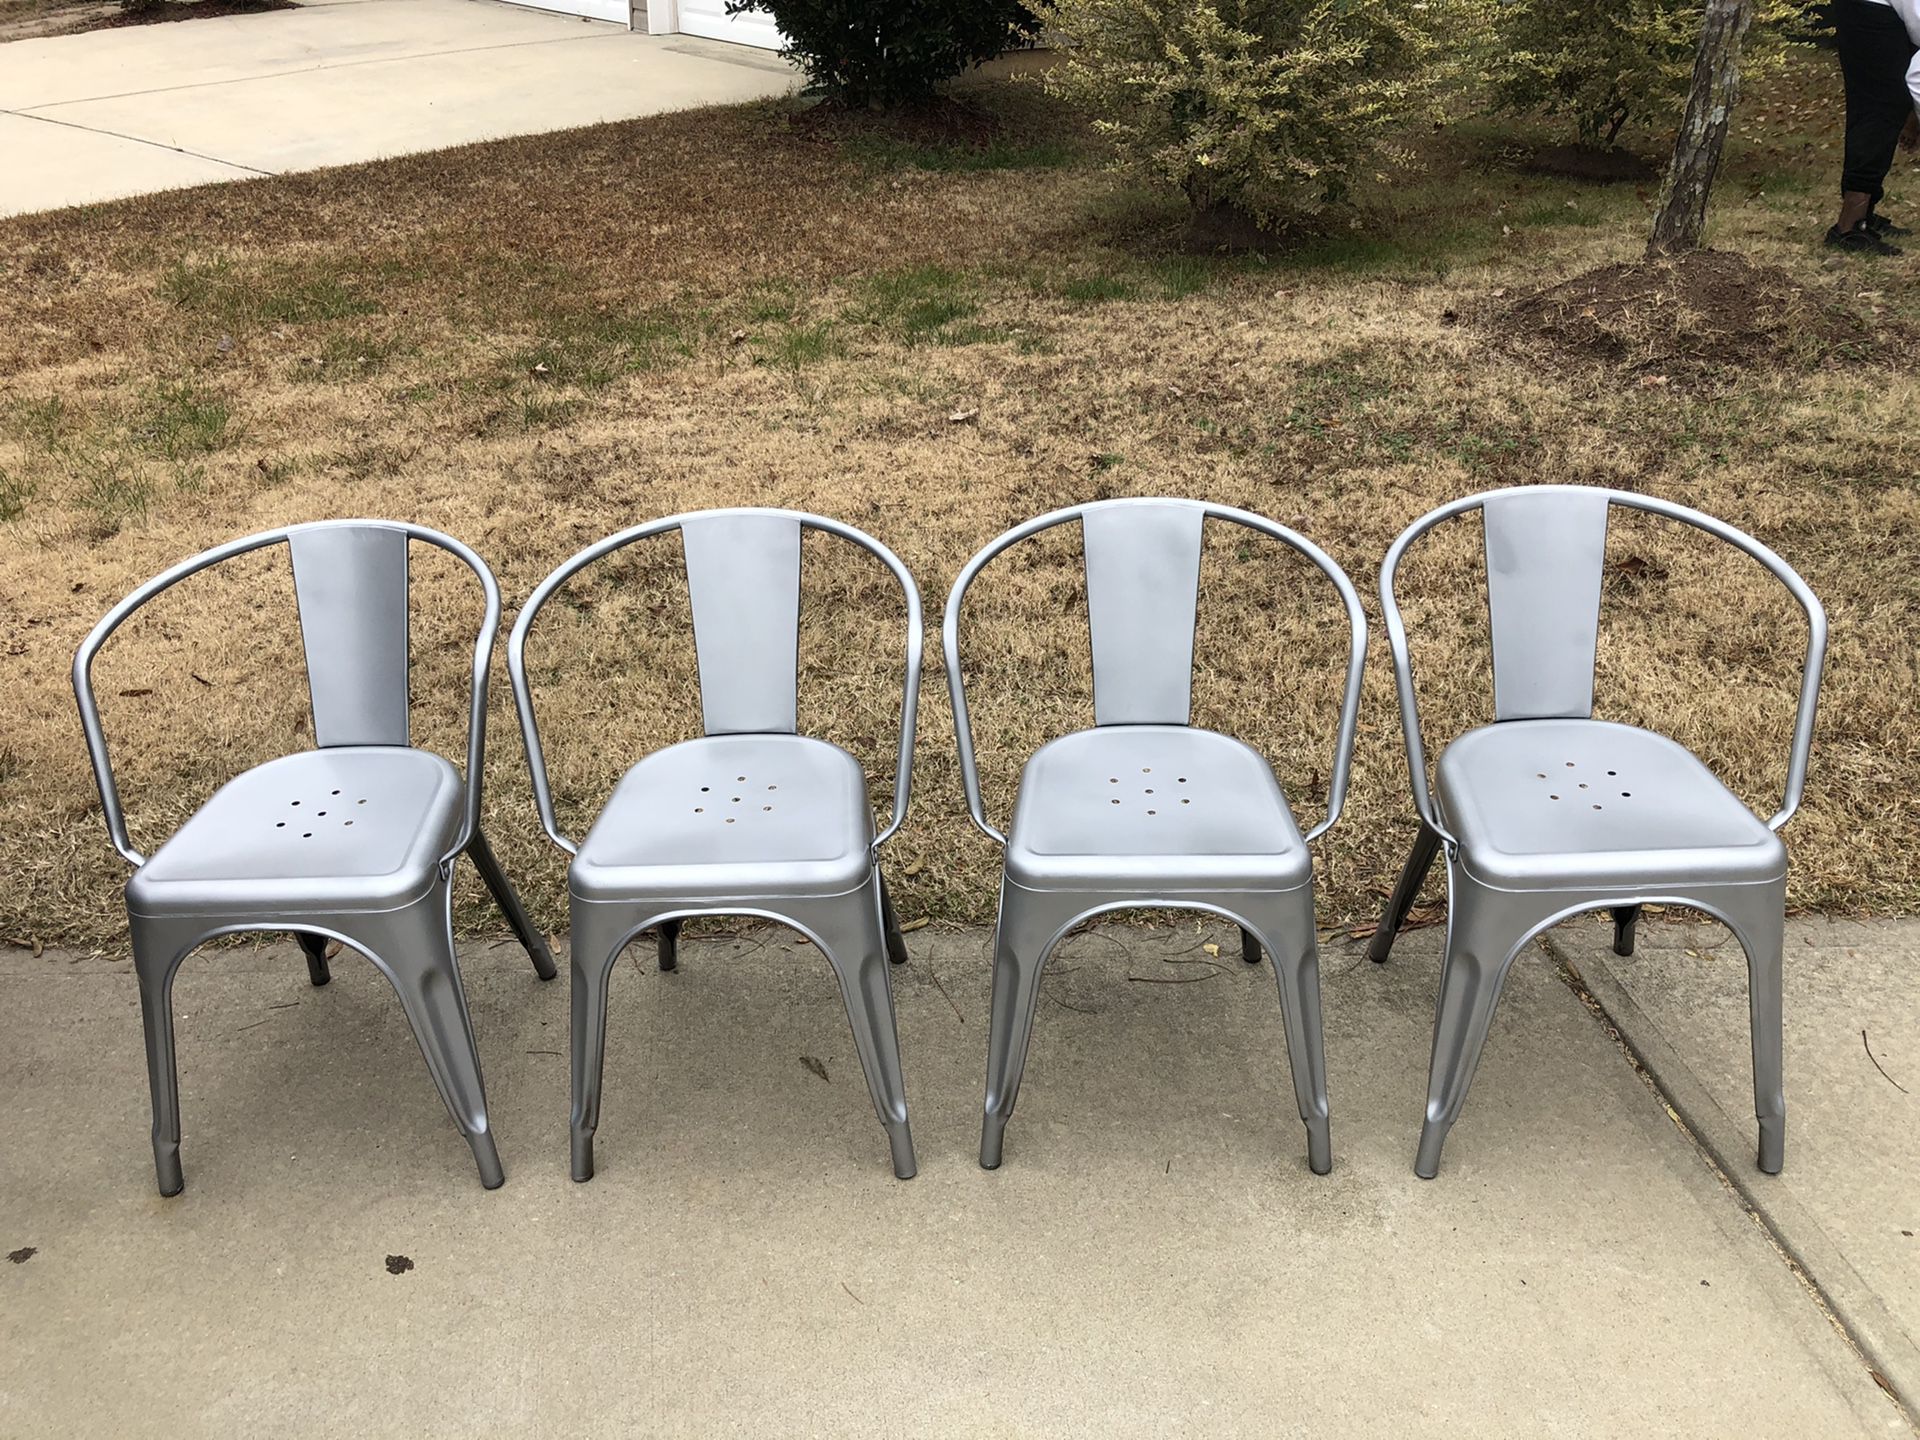 4 Metal Chairs. Sturdy and in excellent condition